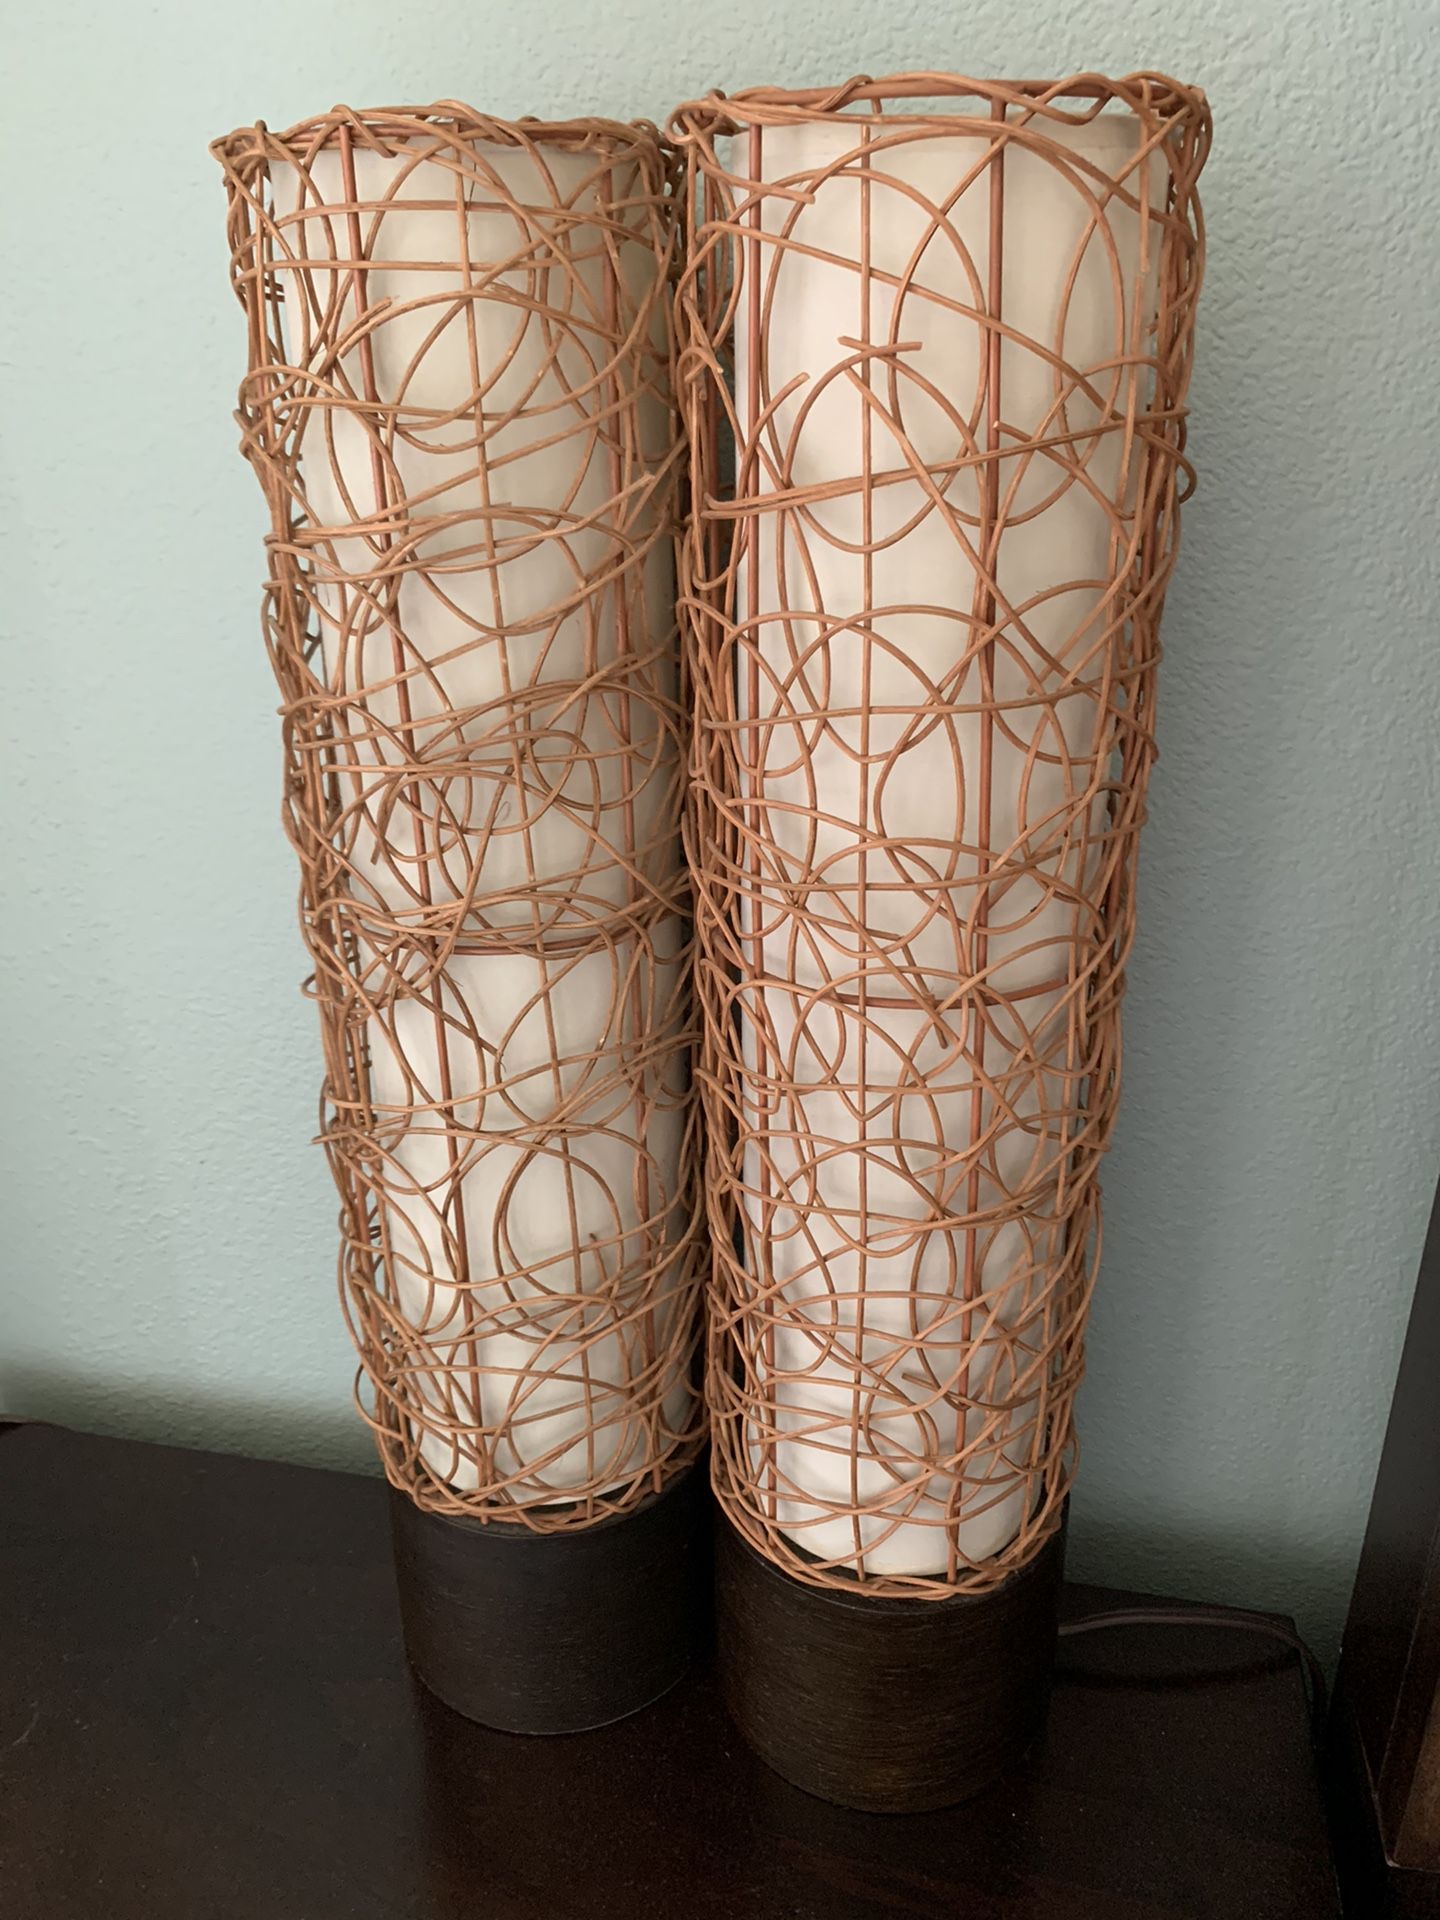 Two table lamps - MAKE AN OFFER